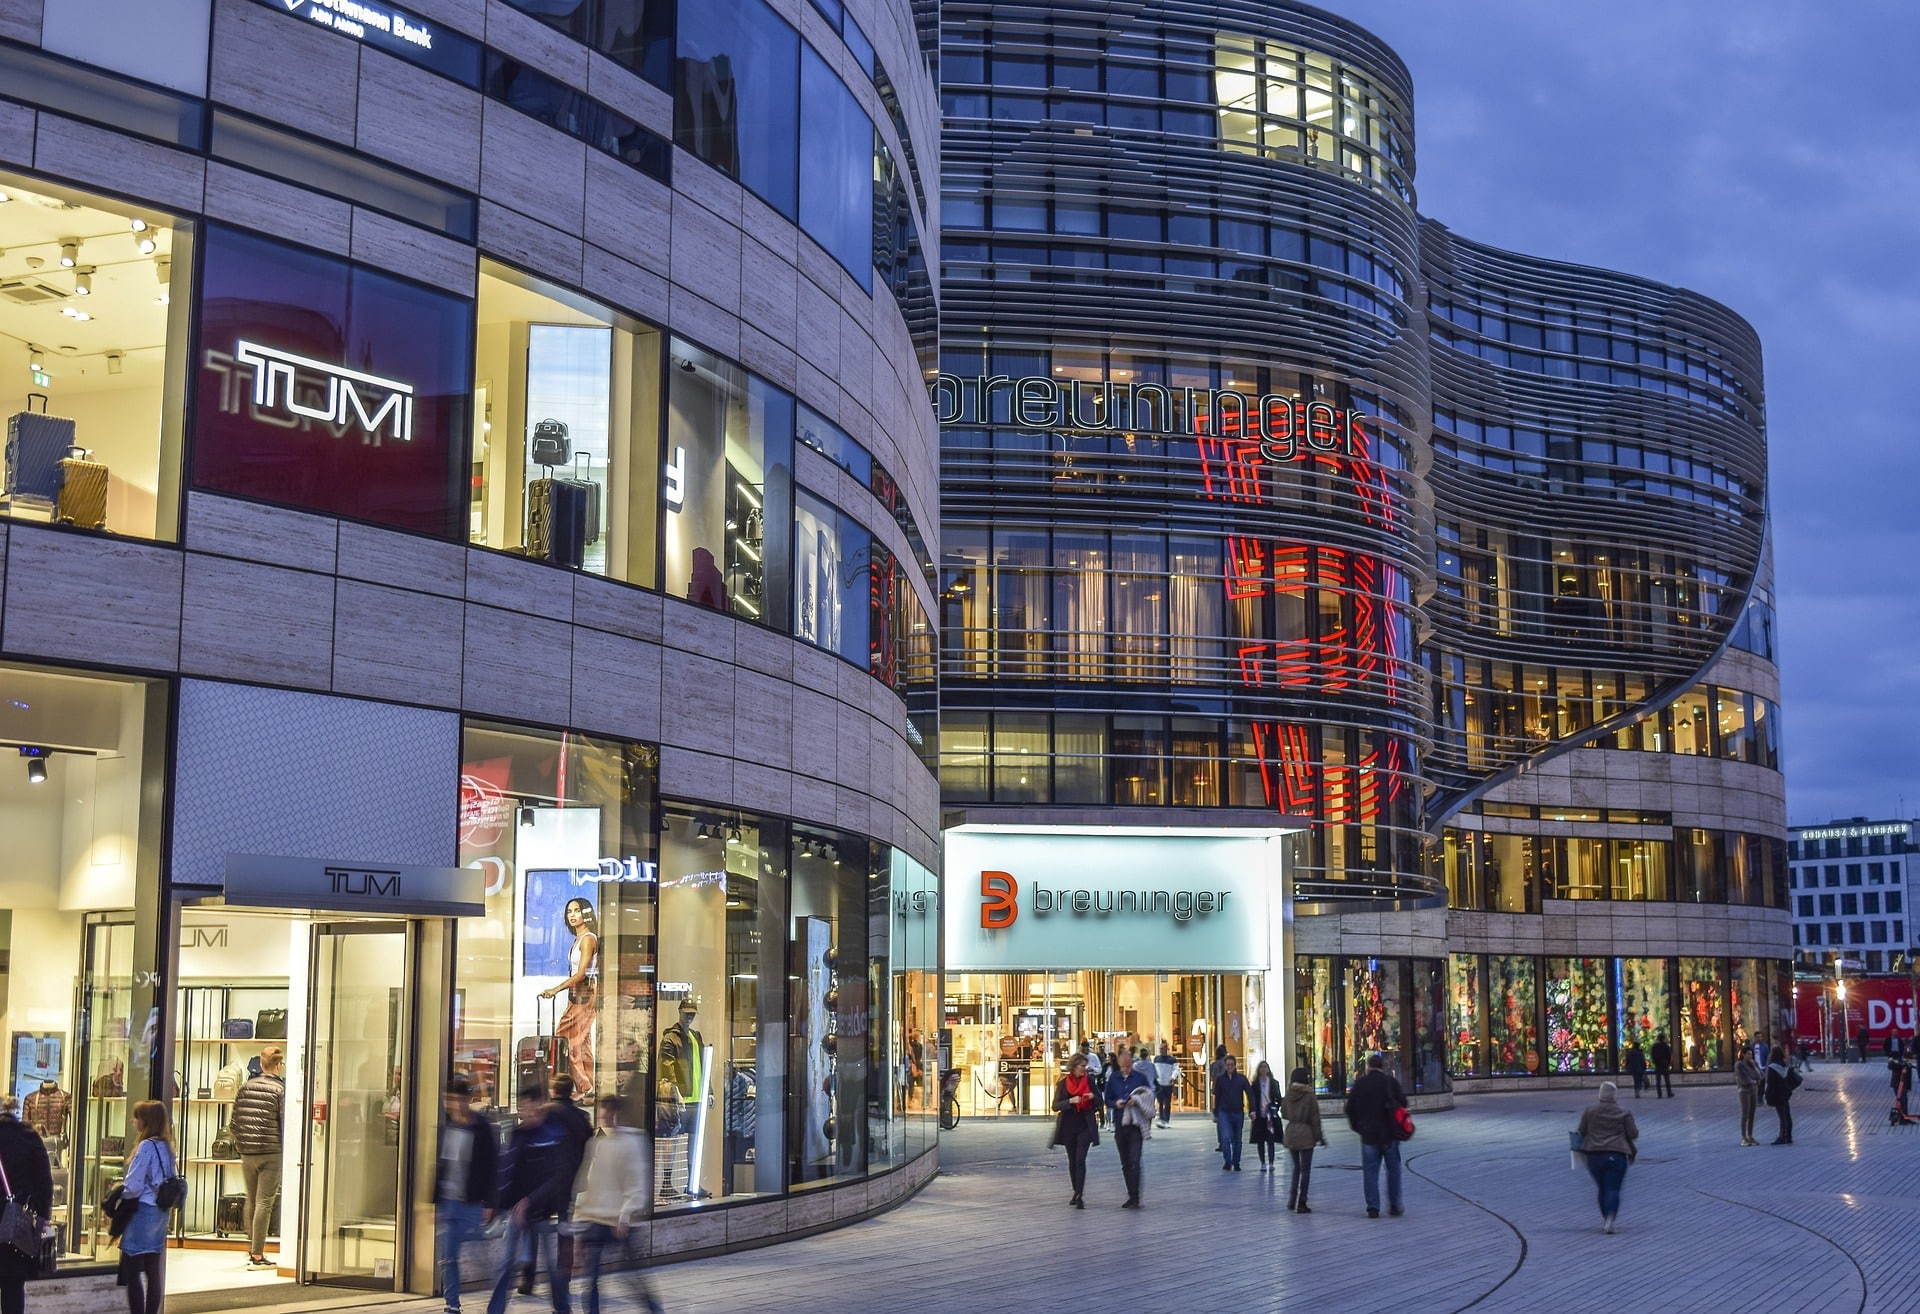 Considered the city's shopping epicentre, Stadtmitte is an upscale commercial district and transit hub